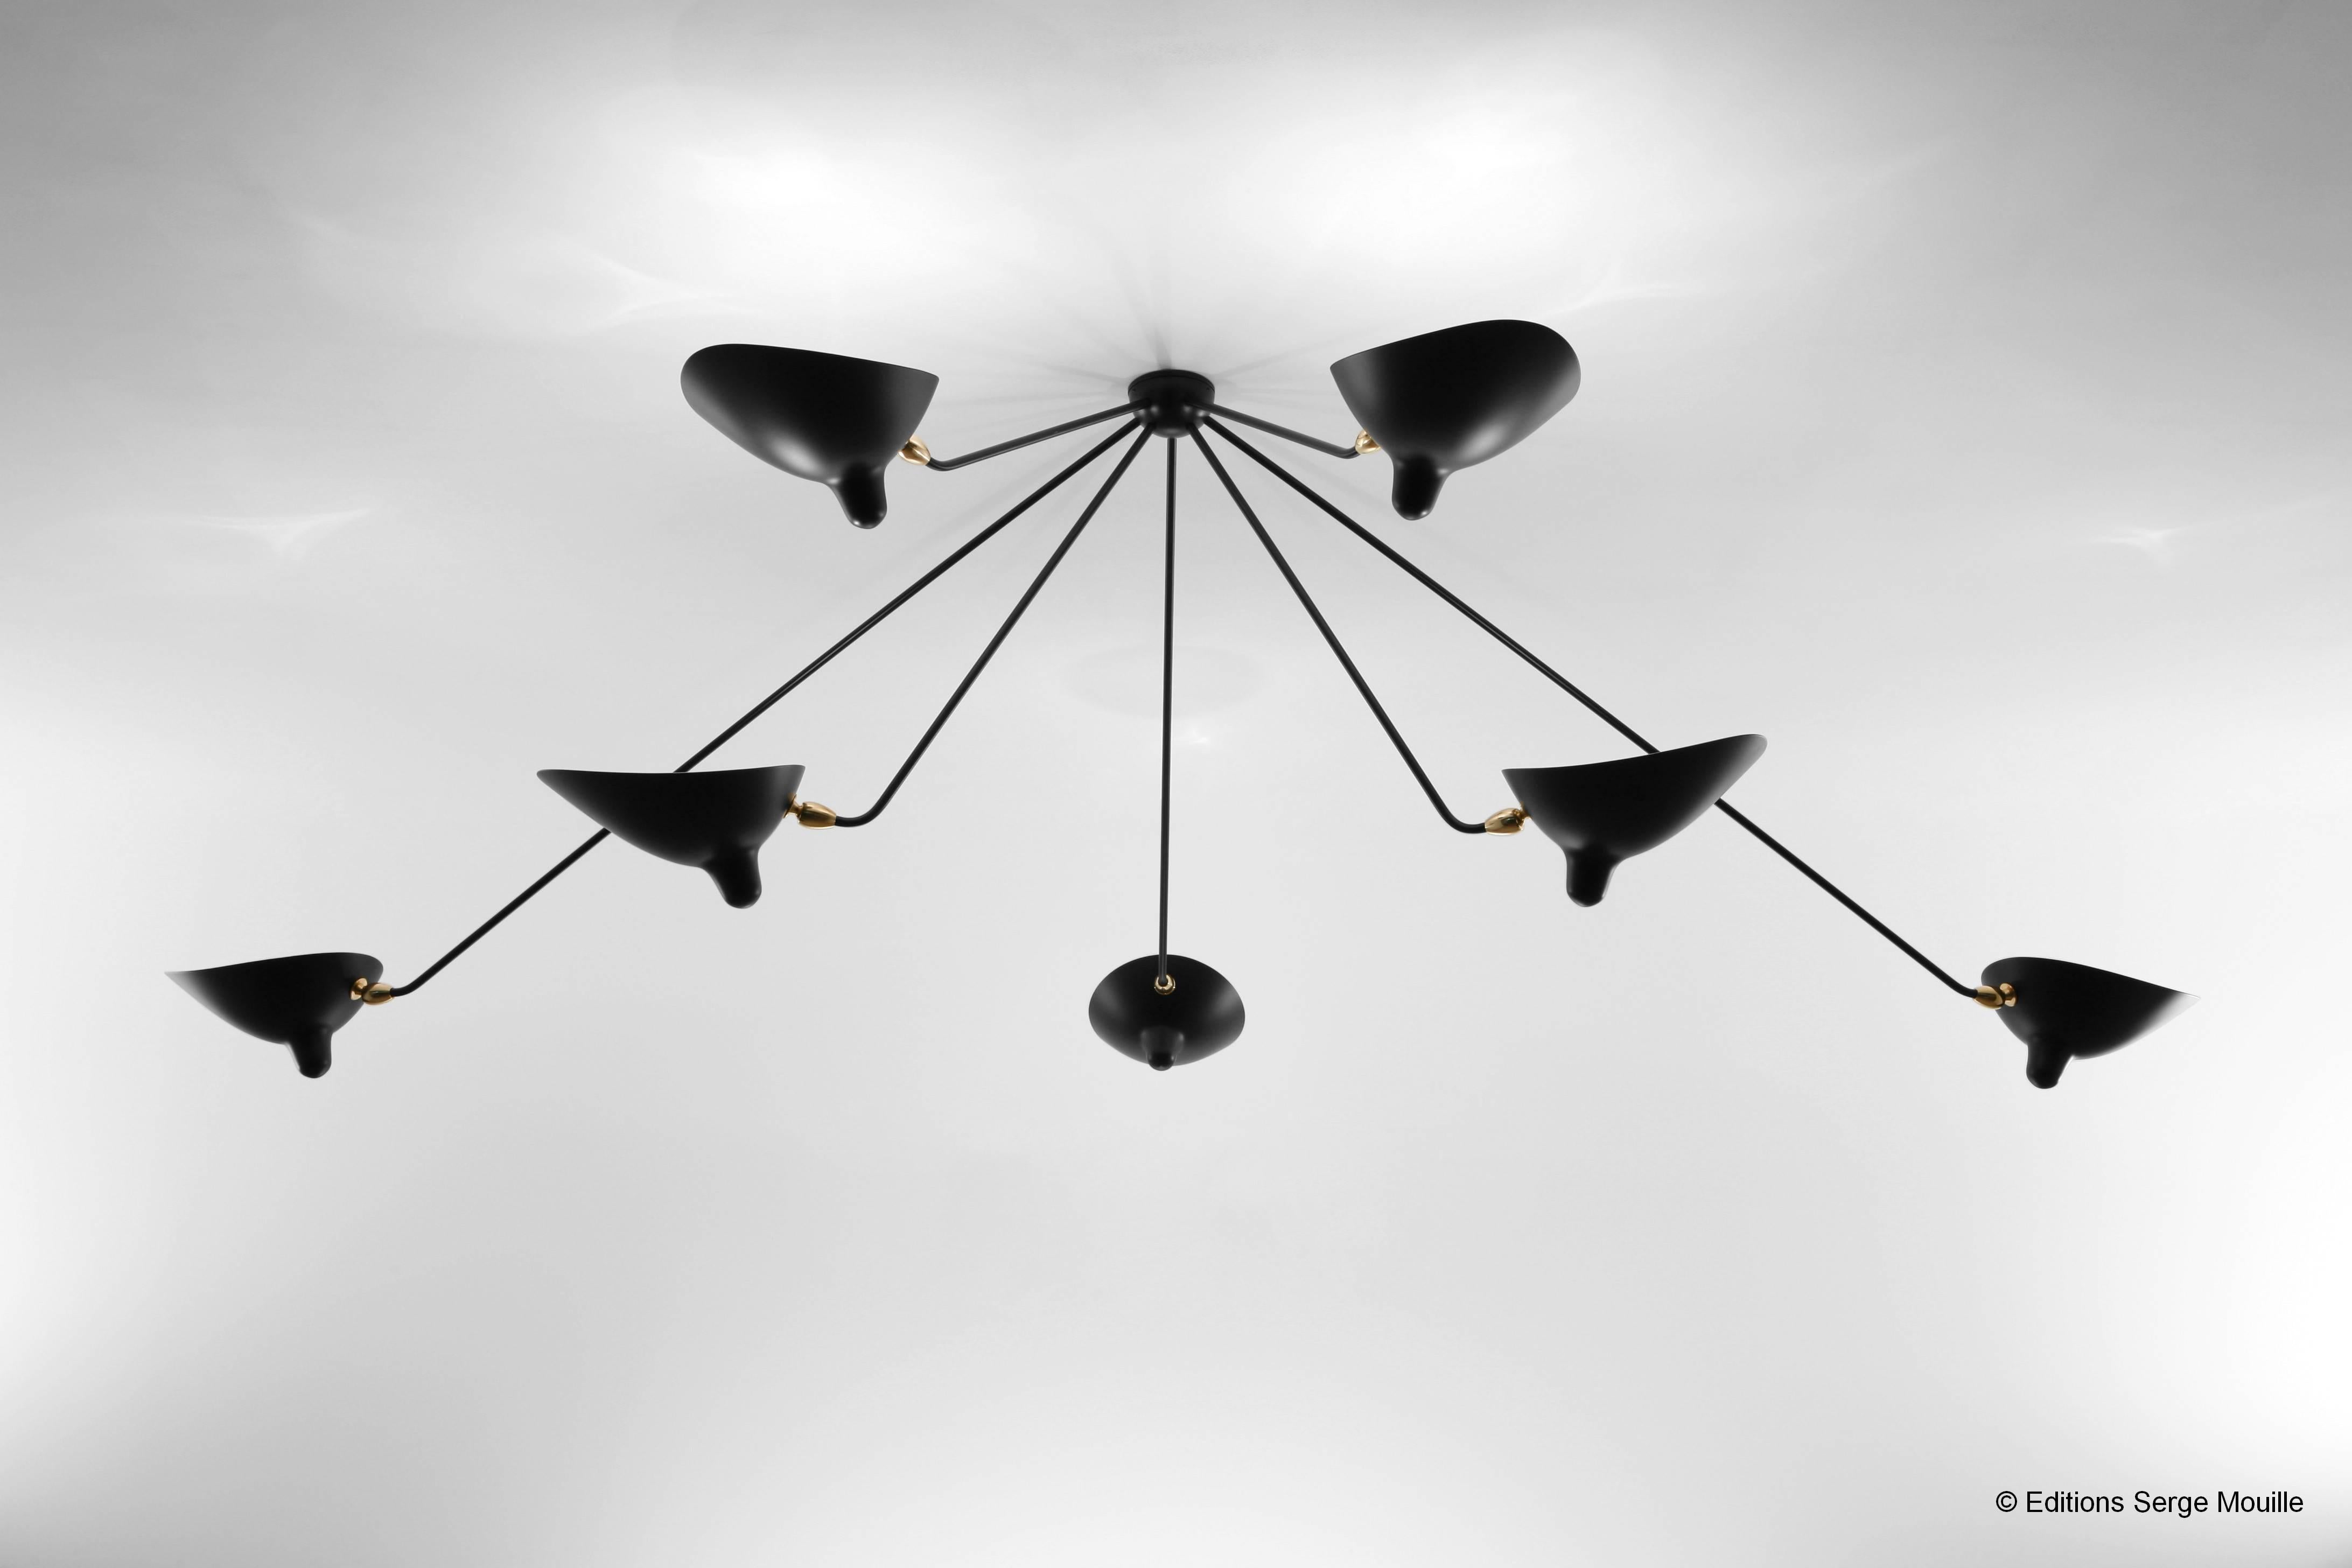 Ceiling Pendant Spider Lamp with Seven Fixed Arms by Les Editions, Serge Mouille In Excellent Condition For Sale In London, GB